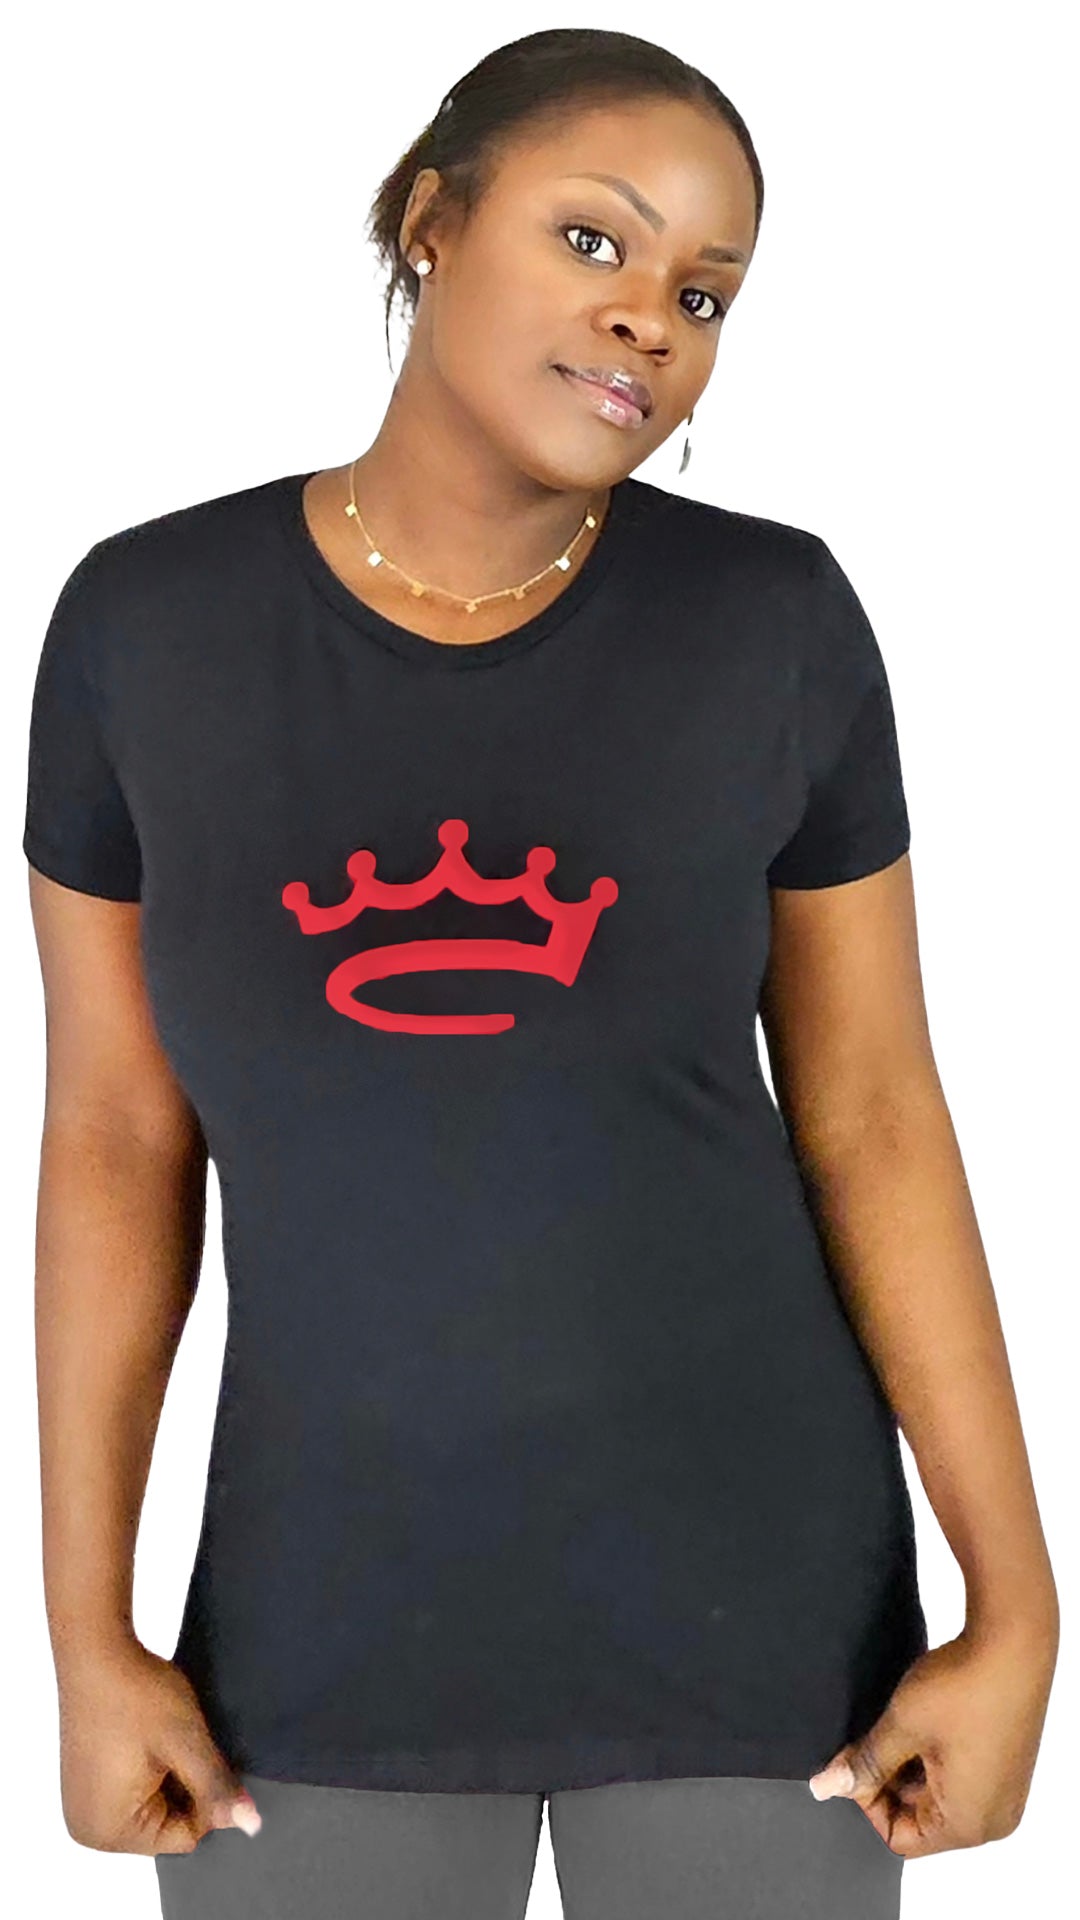 Women's Black / Red - shirt - Crowned Brand ™